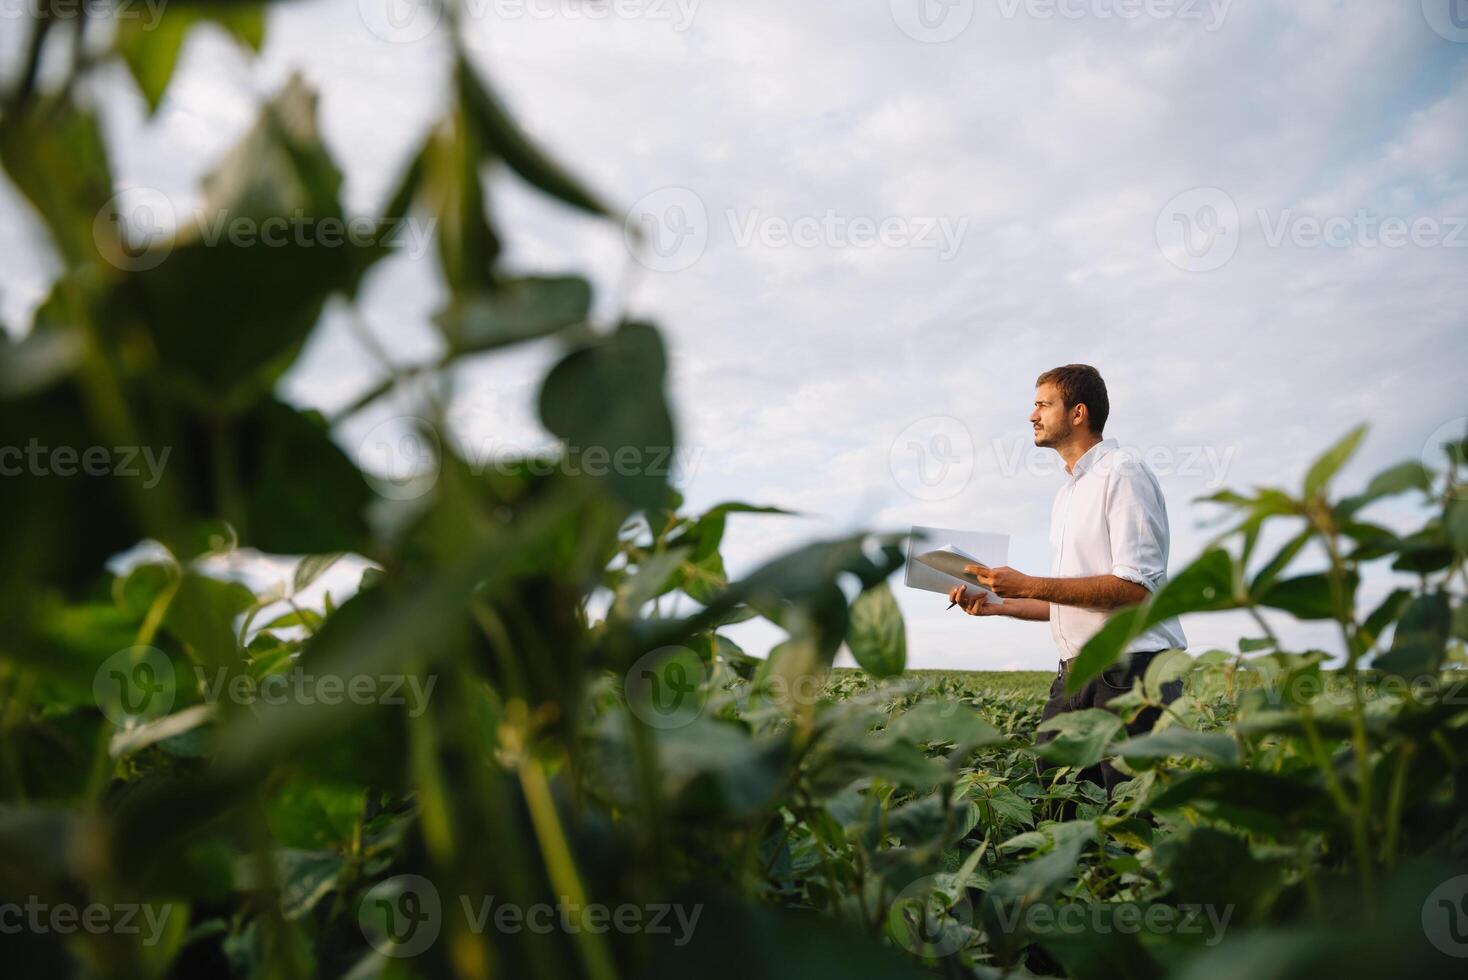 Young farmer in filed examining soybean corp. He is thumbs up photo